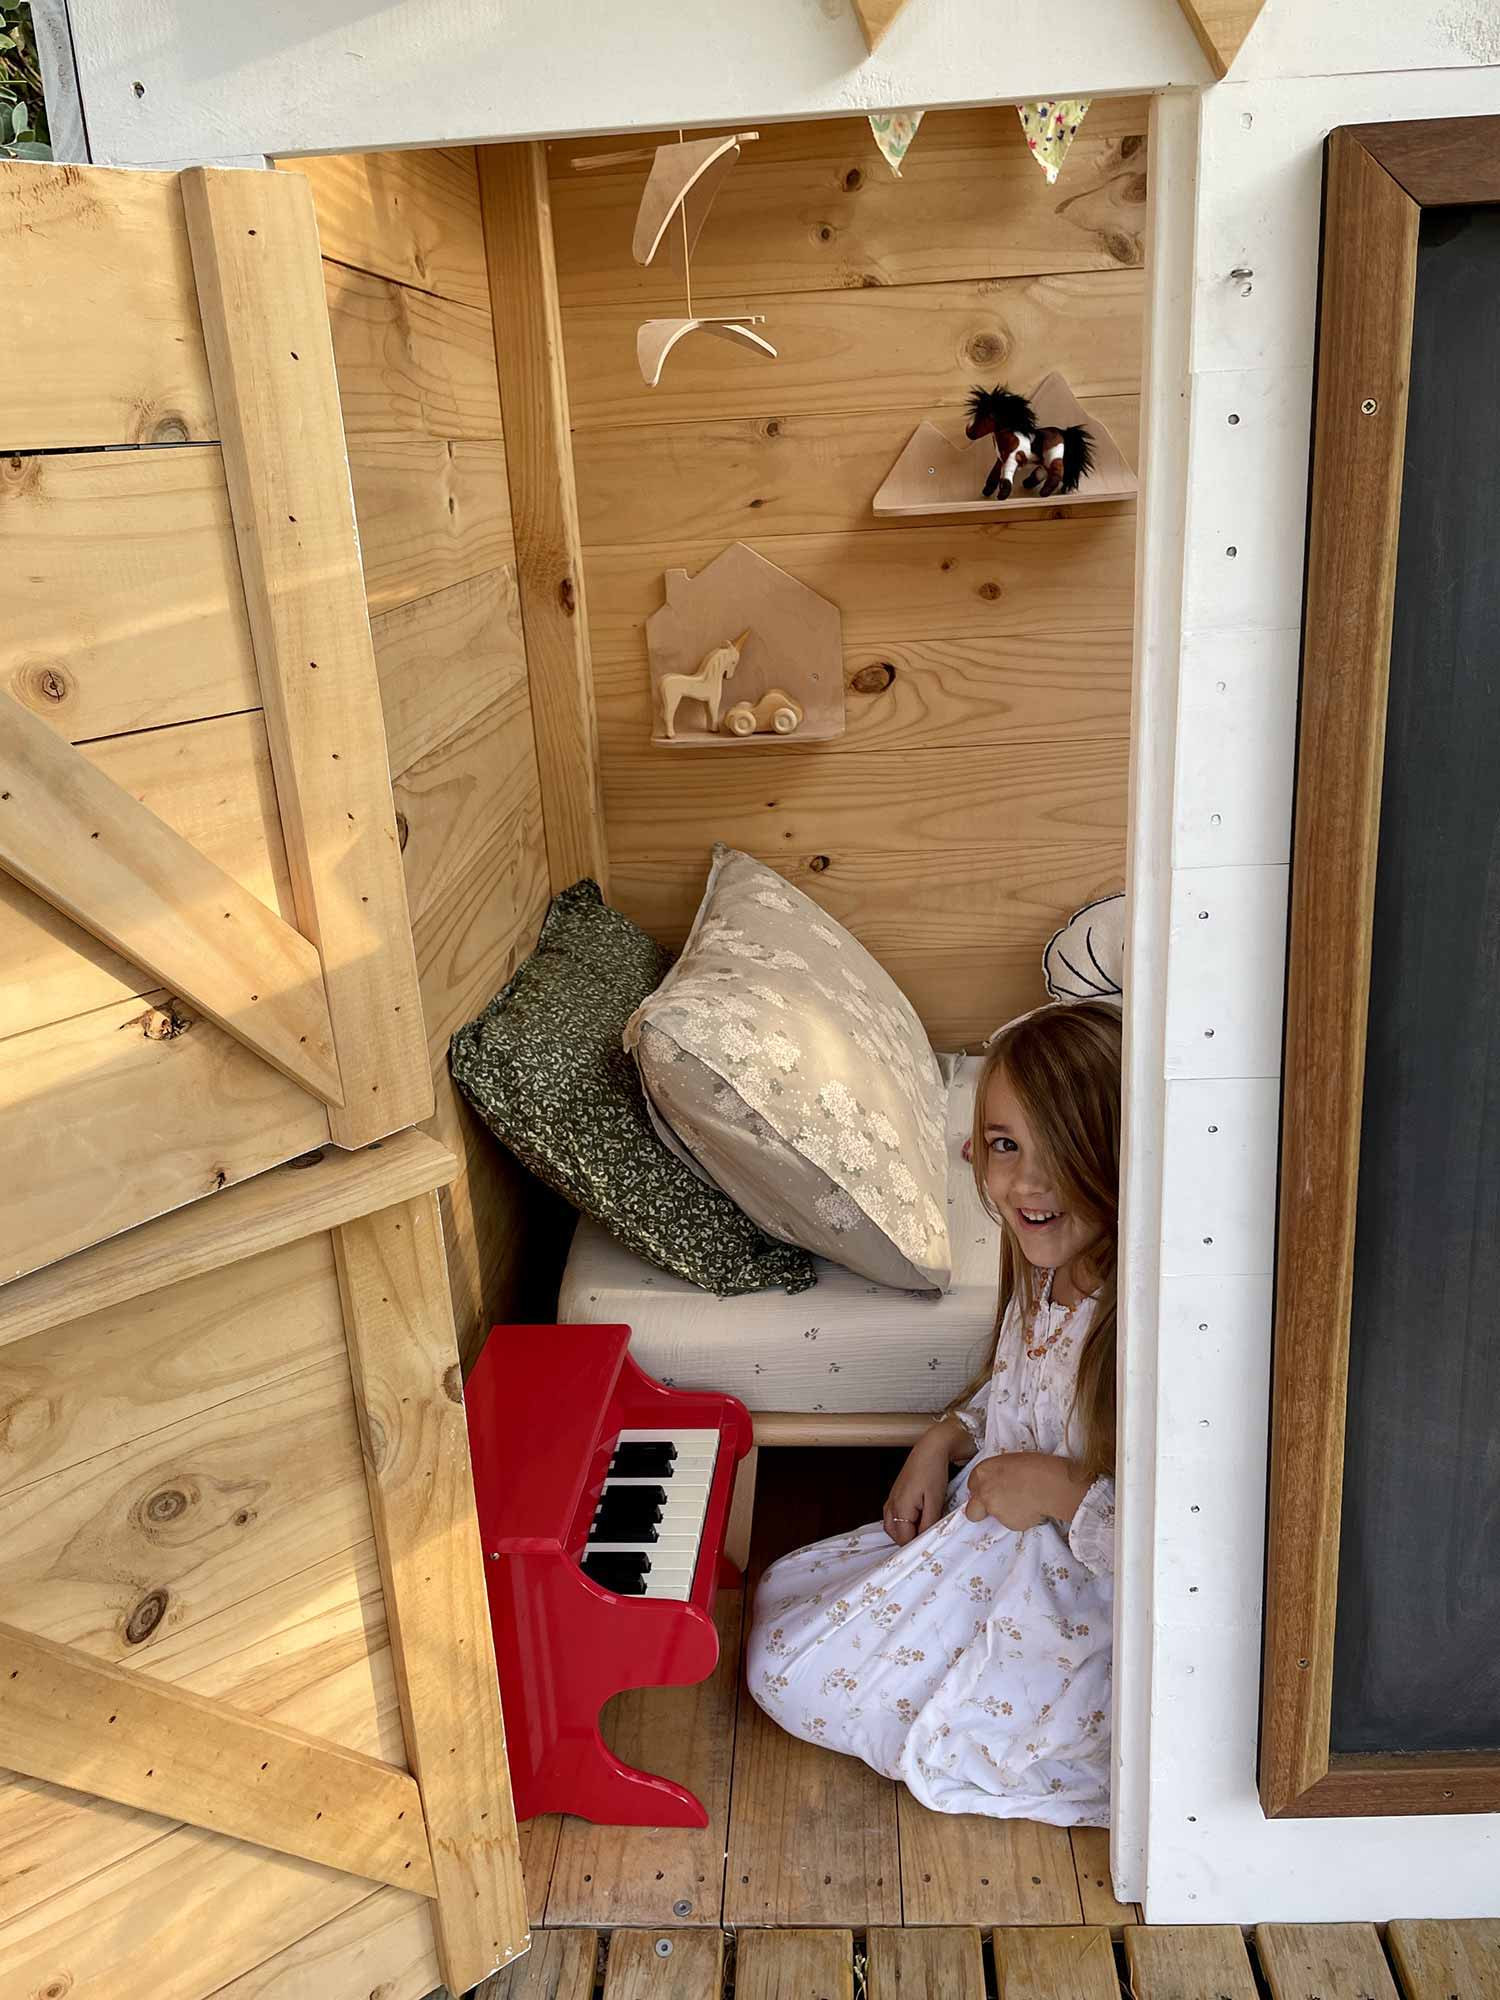 Kids hanging out in their cubby house